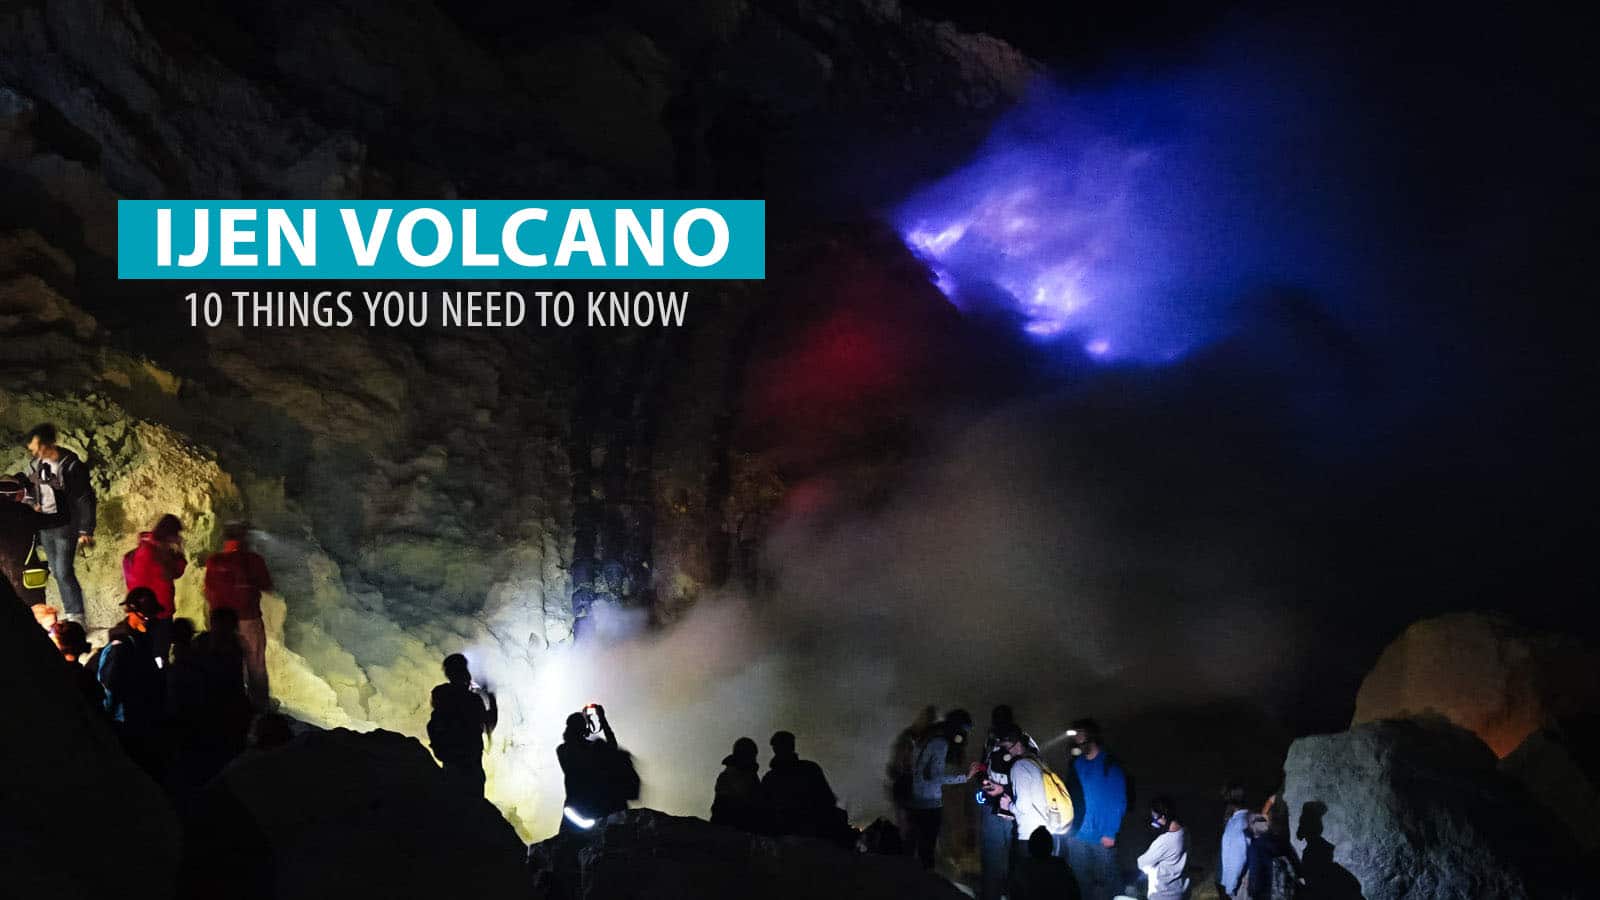 KAWAH IJEN, INDONESIA: 10 Things You Need to Know Before the Climb